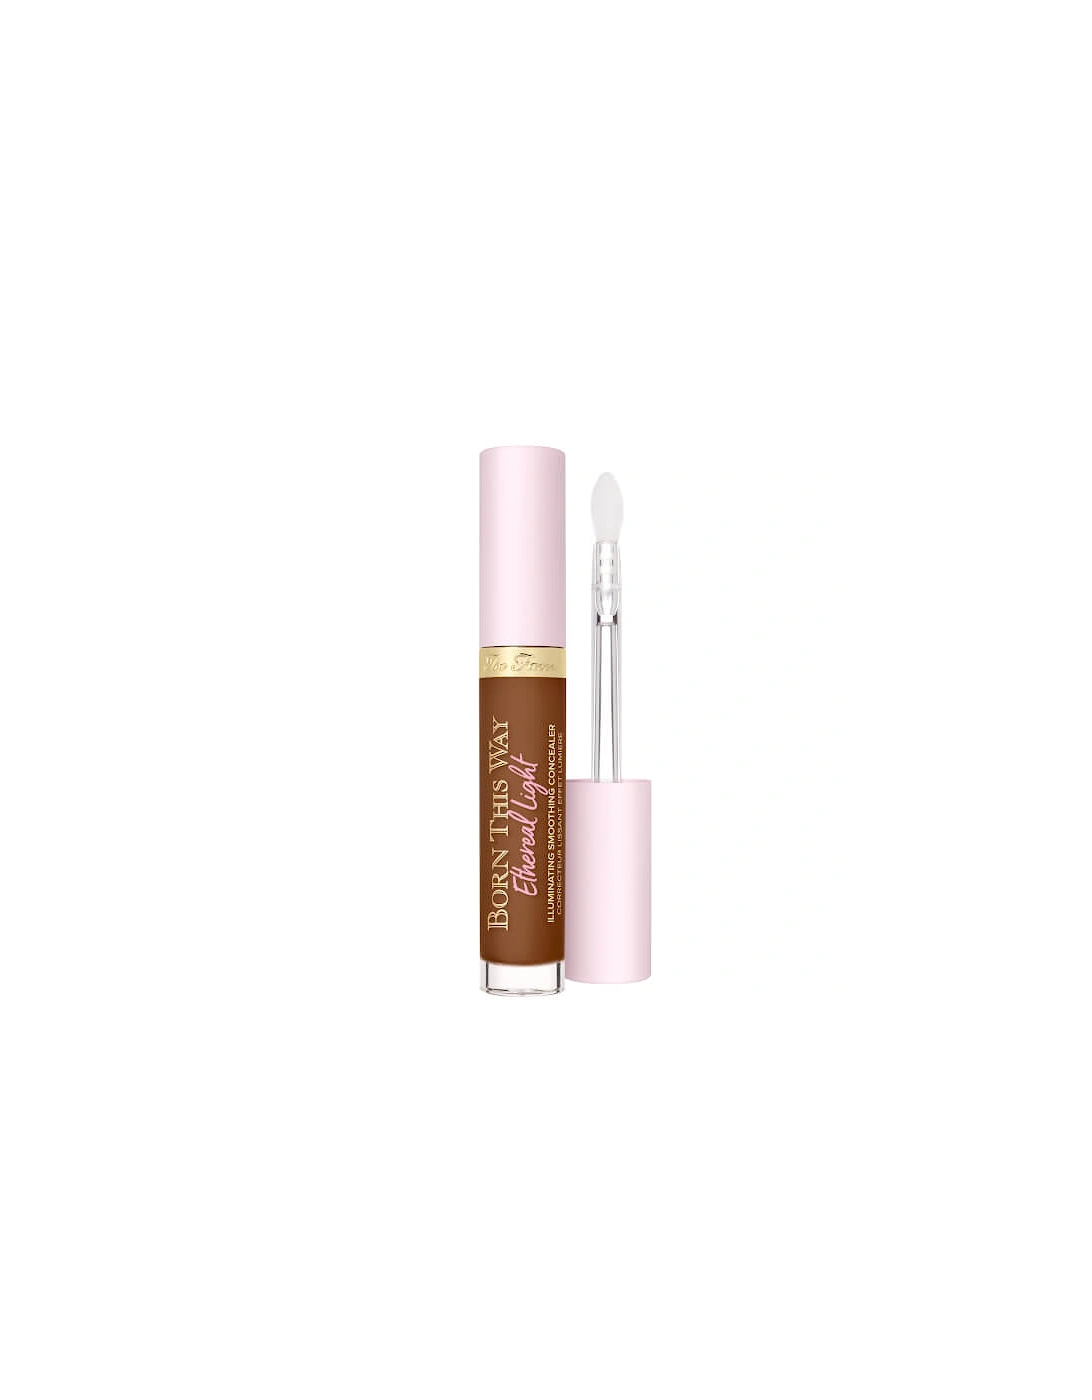 Born This Way Ethereal Light Illuminating Smoothing Concealer - Milk Chocolate, 2 of 1